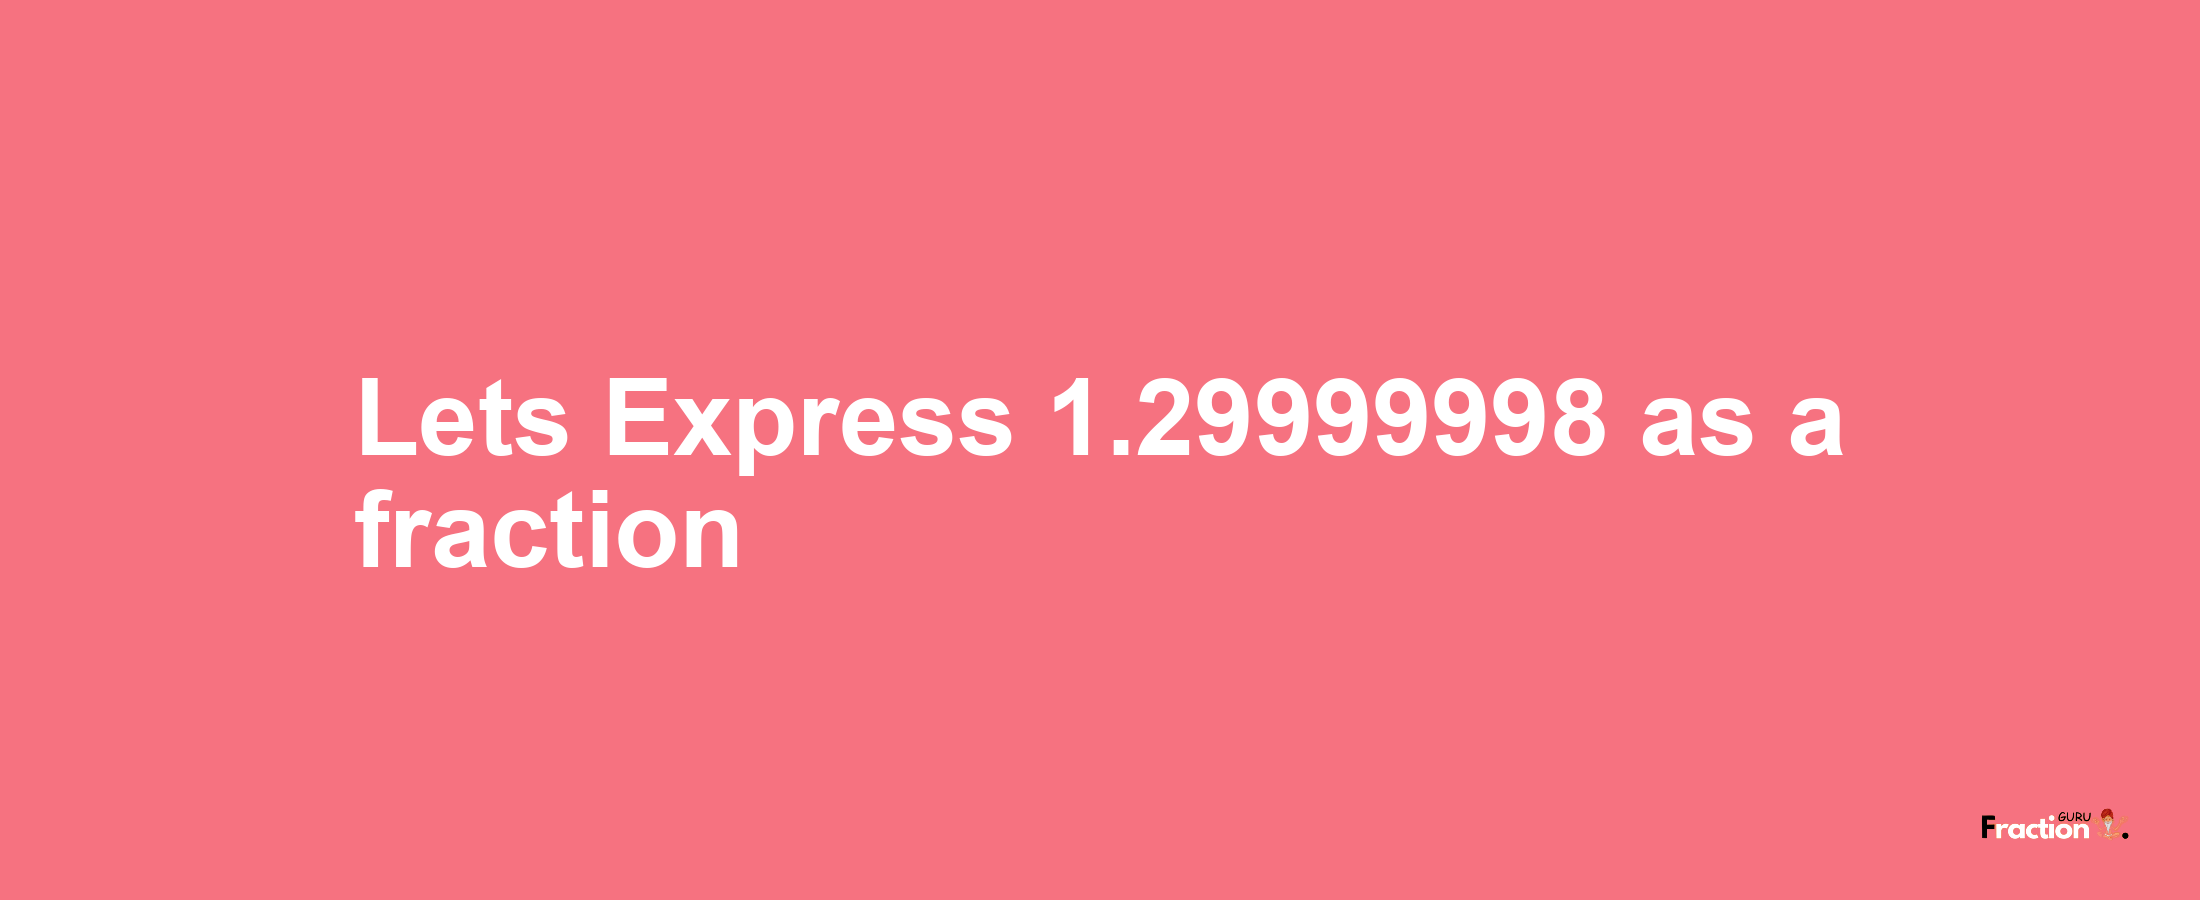 Lets Express 1.29999998 as afraction